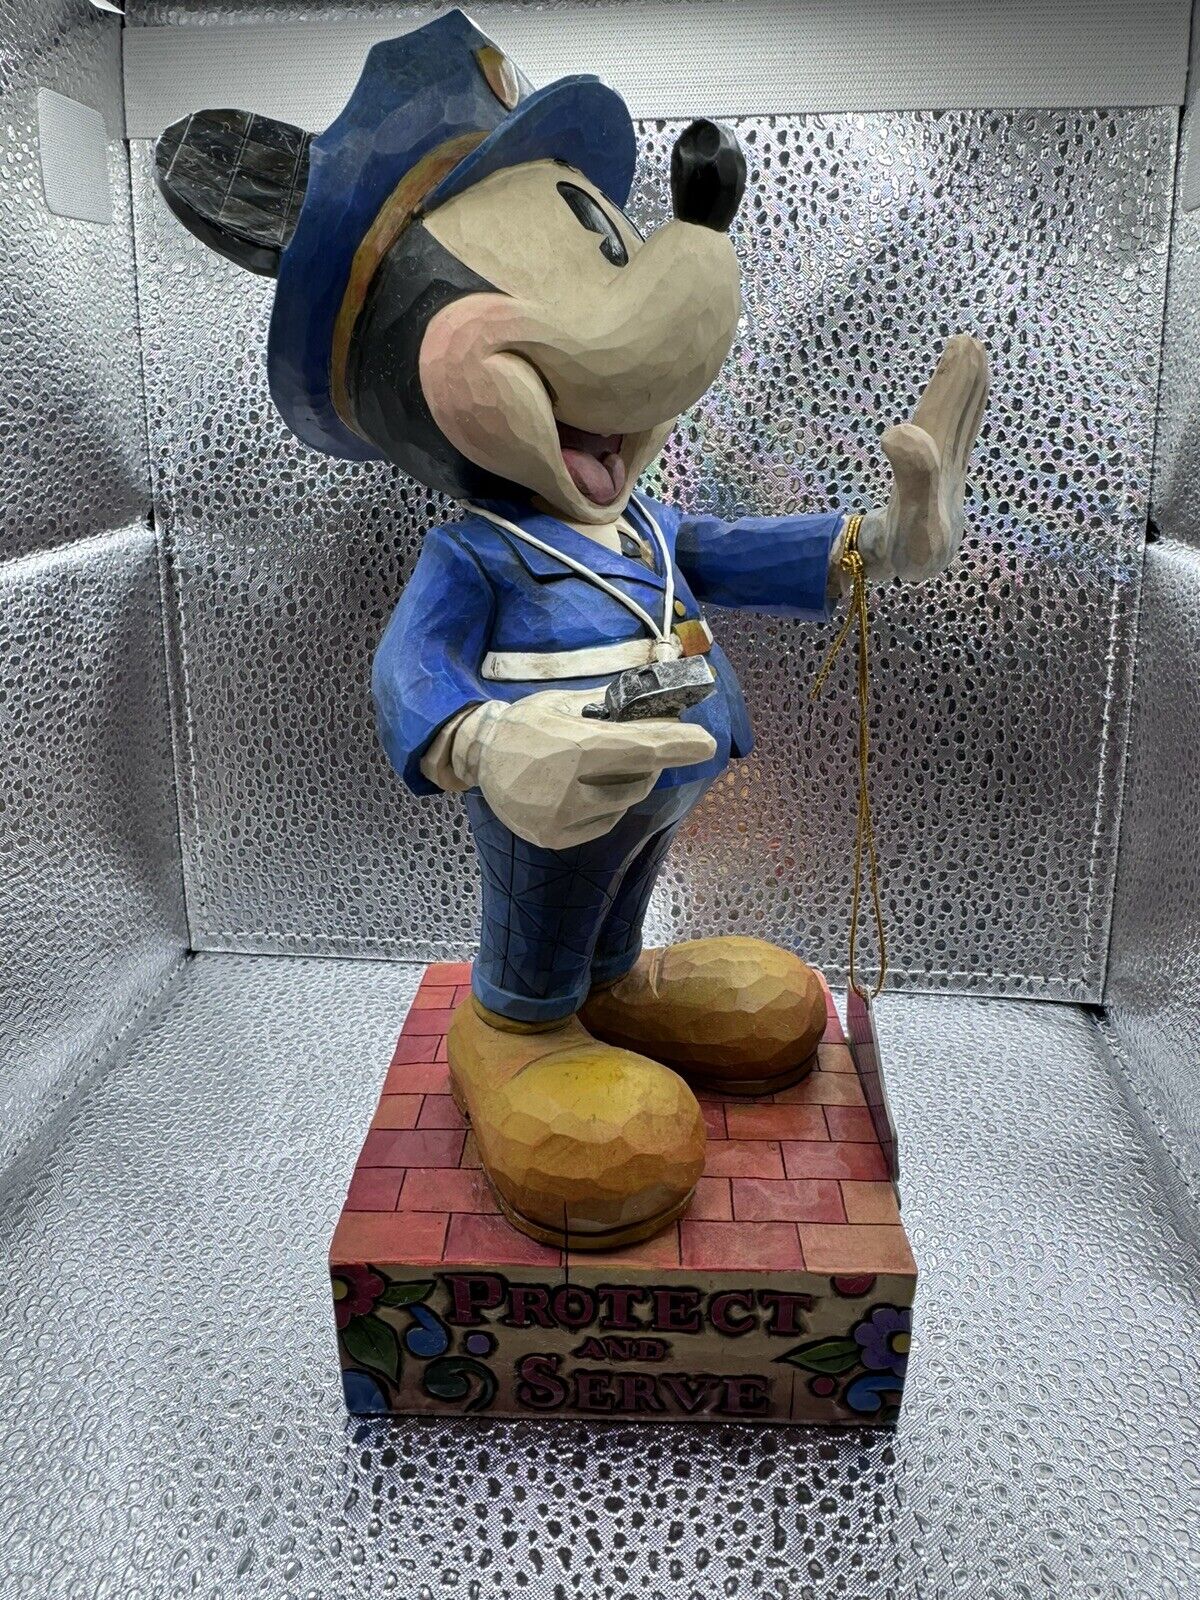 Disney Traditions Mickey Mouse Jim Shore “Protect And Serve” Police Figurine